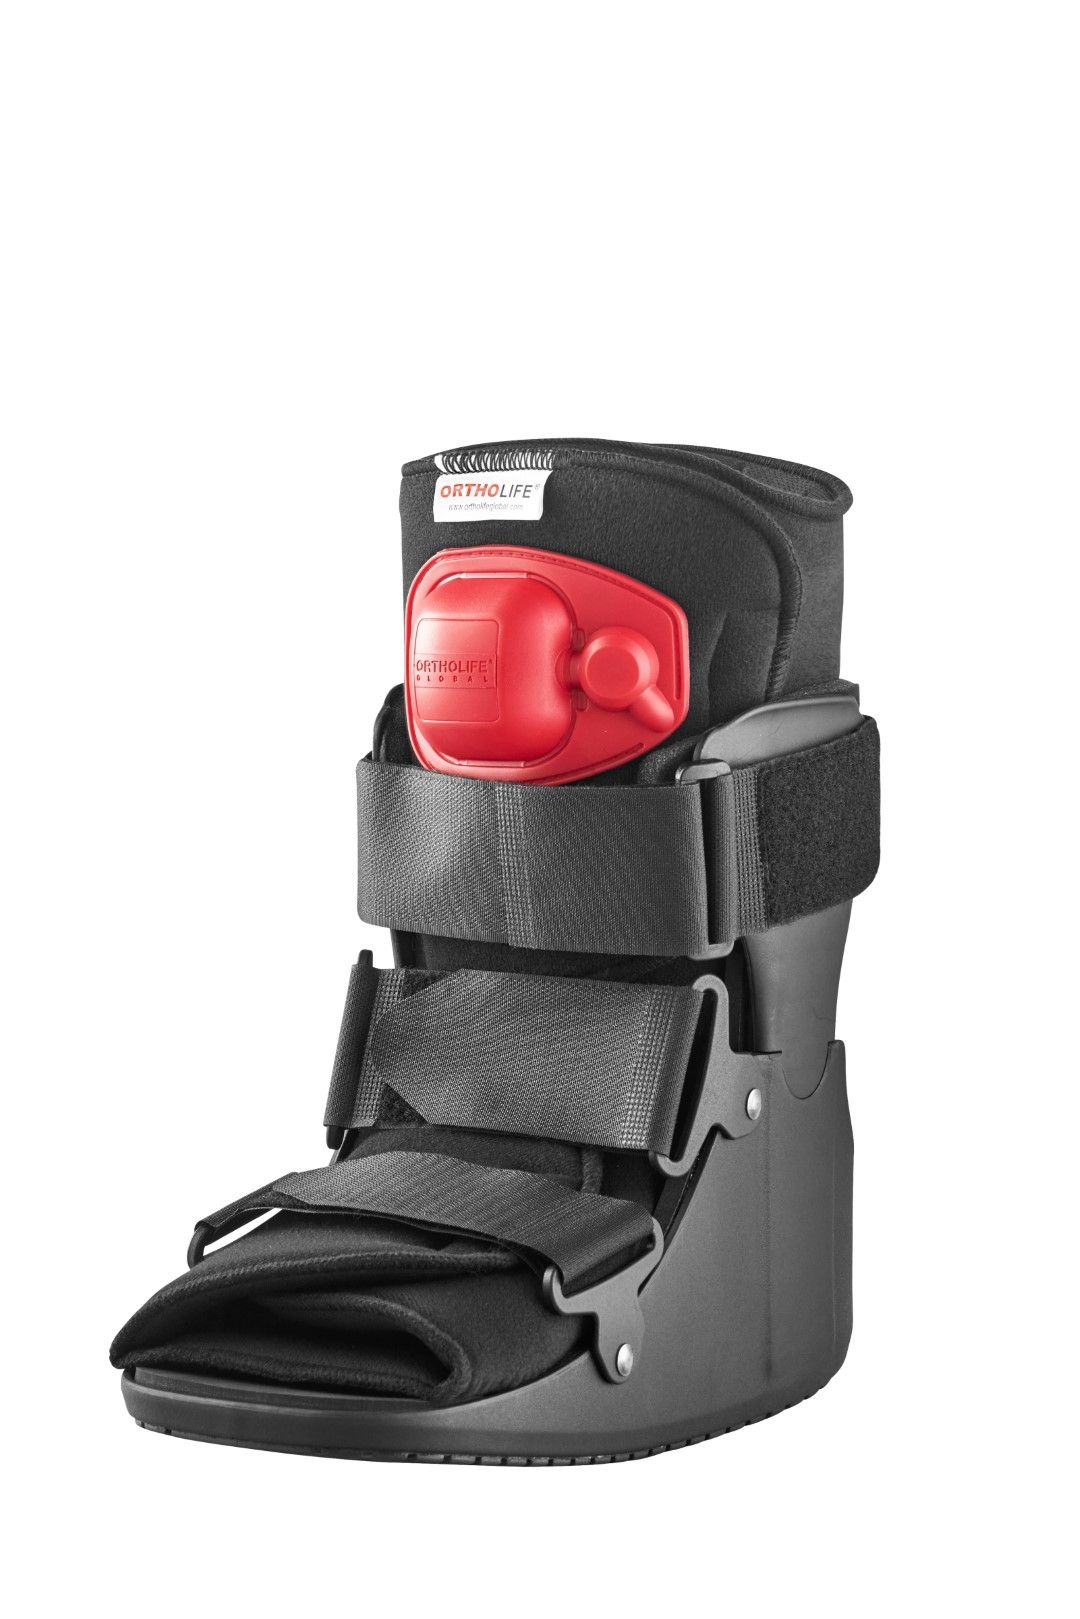 ORTHOLIFE ACUMOVE LOW-RISE AIR WALKERS photo